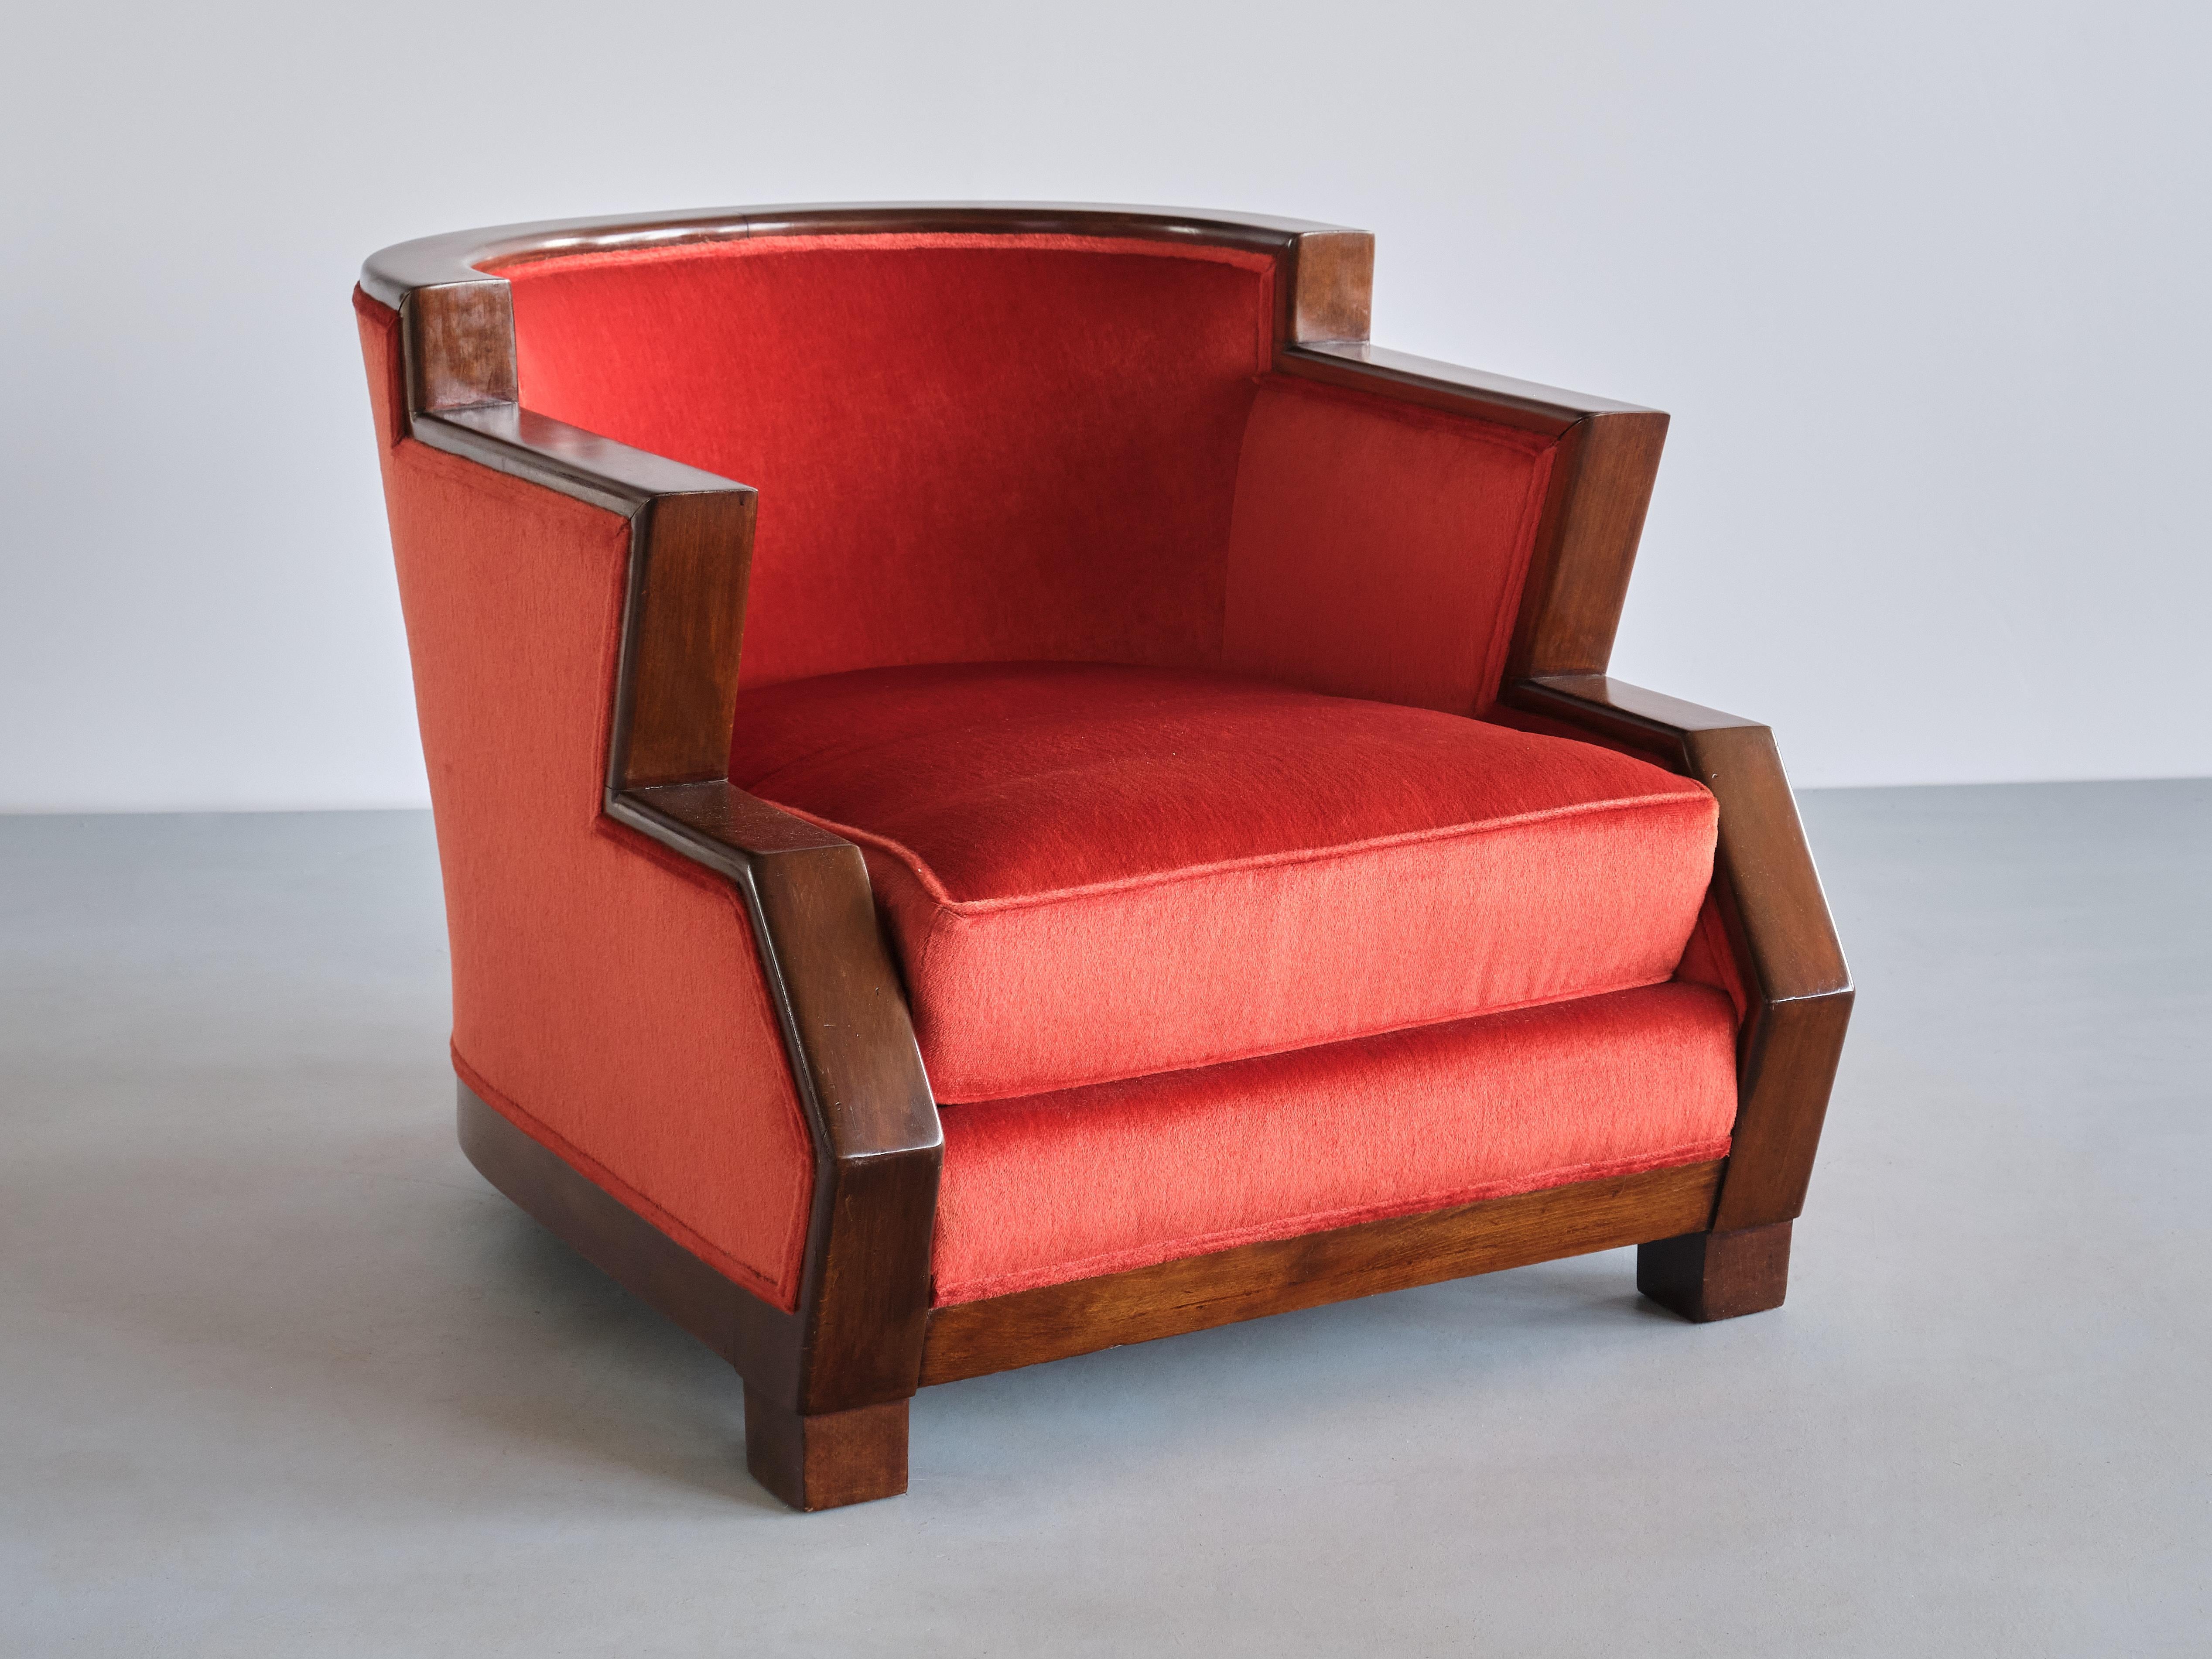 This striking Art Deco armchair was manufactured in Belgium in the mid 1920s. The distinct tiered and angular shape of the design is a great example of the influence of cubism in this particular era. The originality of the design and the